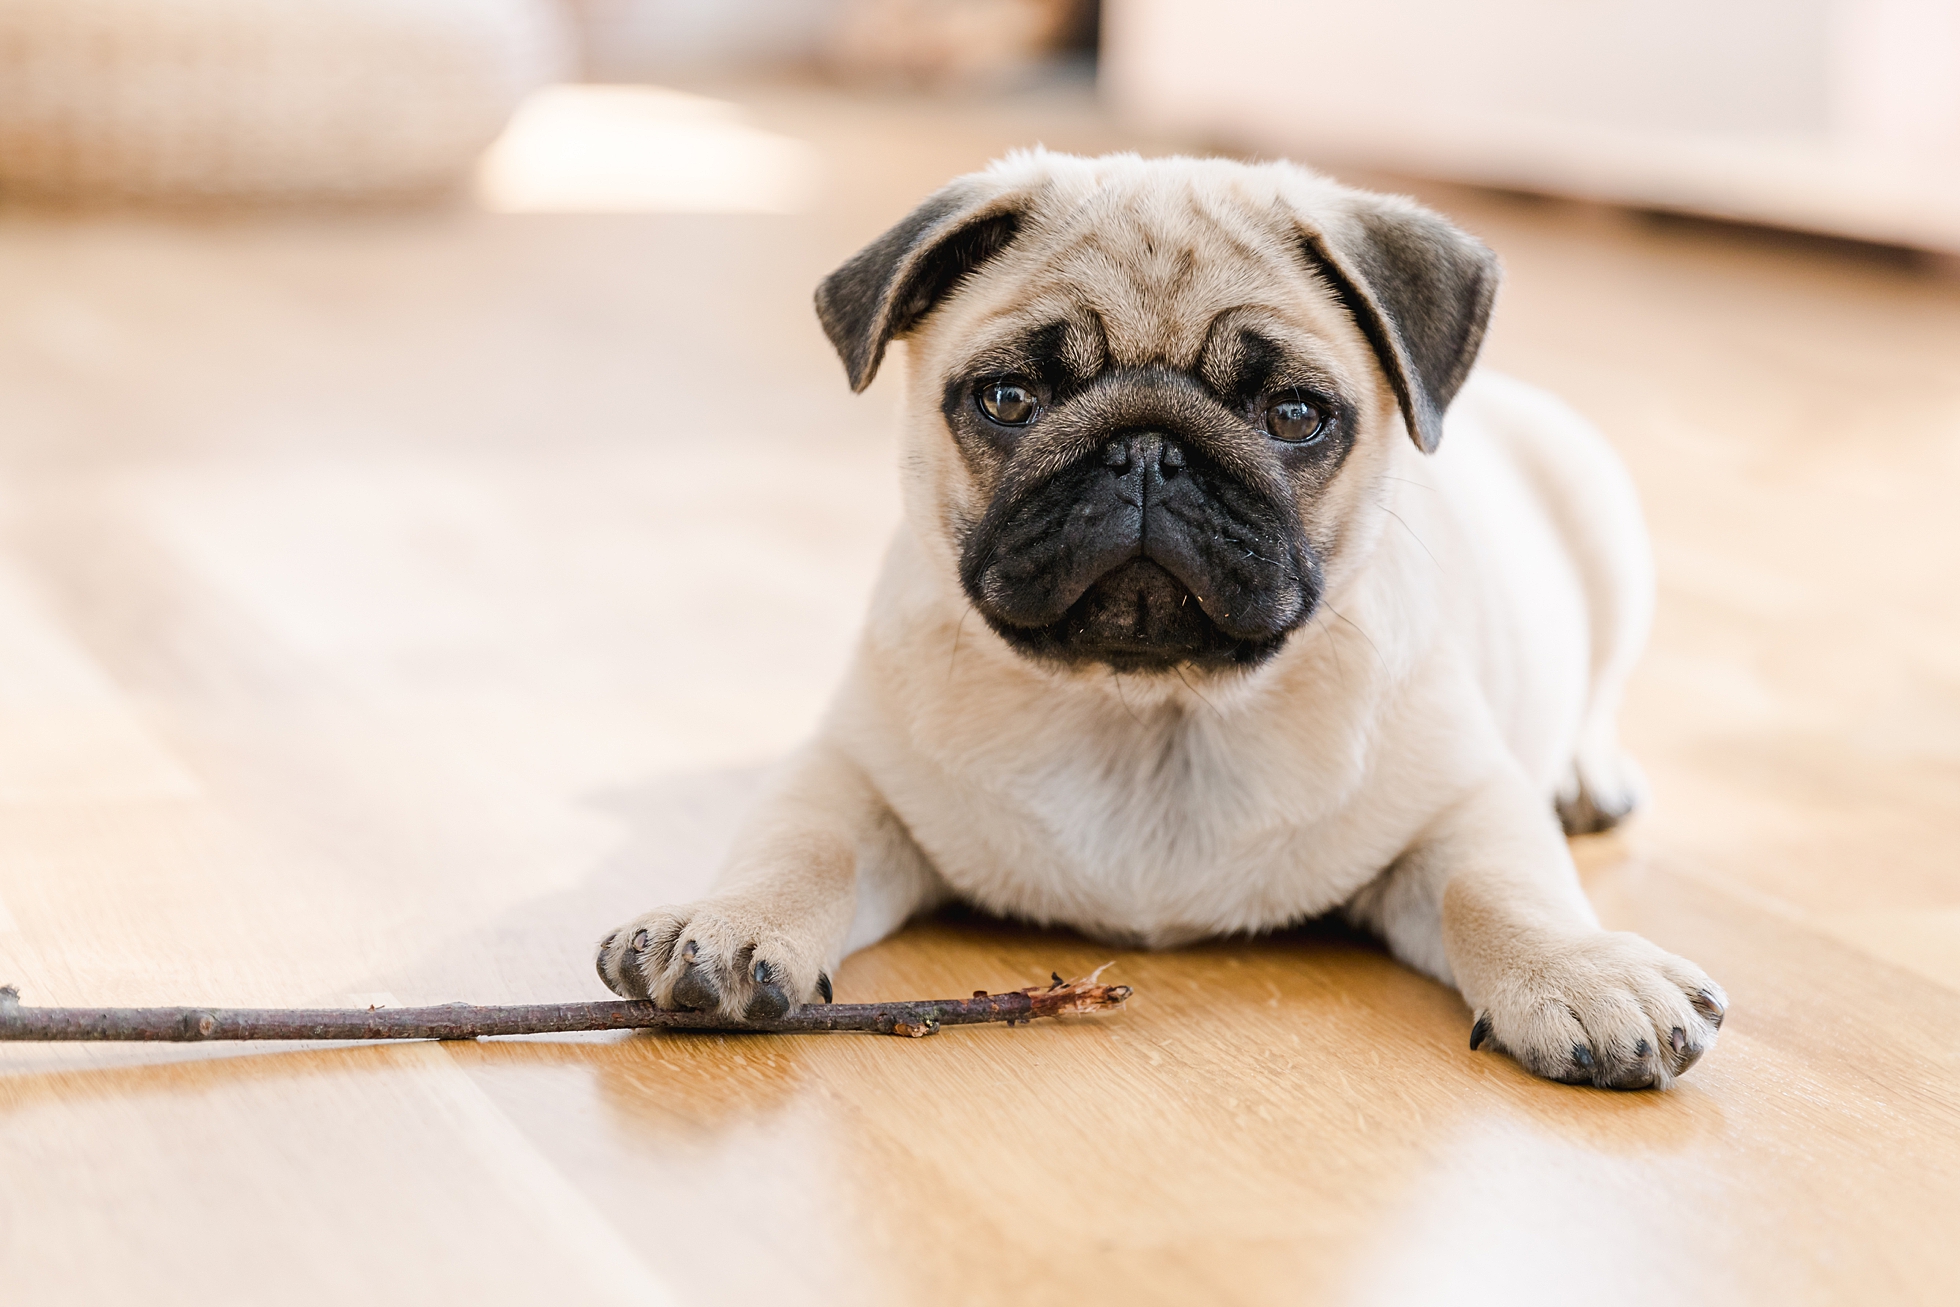 A cute pug puppy lying on the floor with a stick